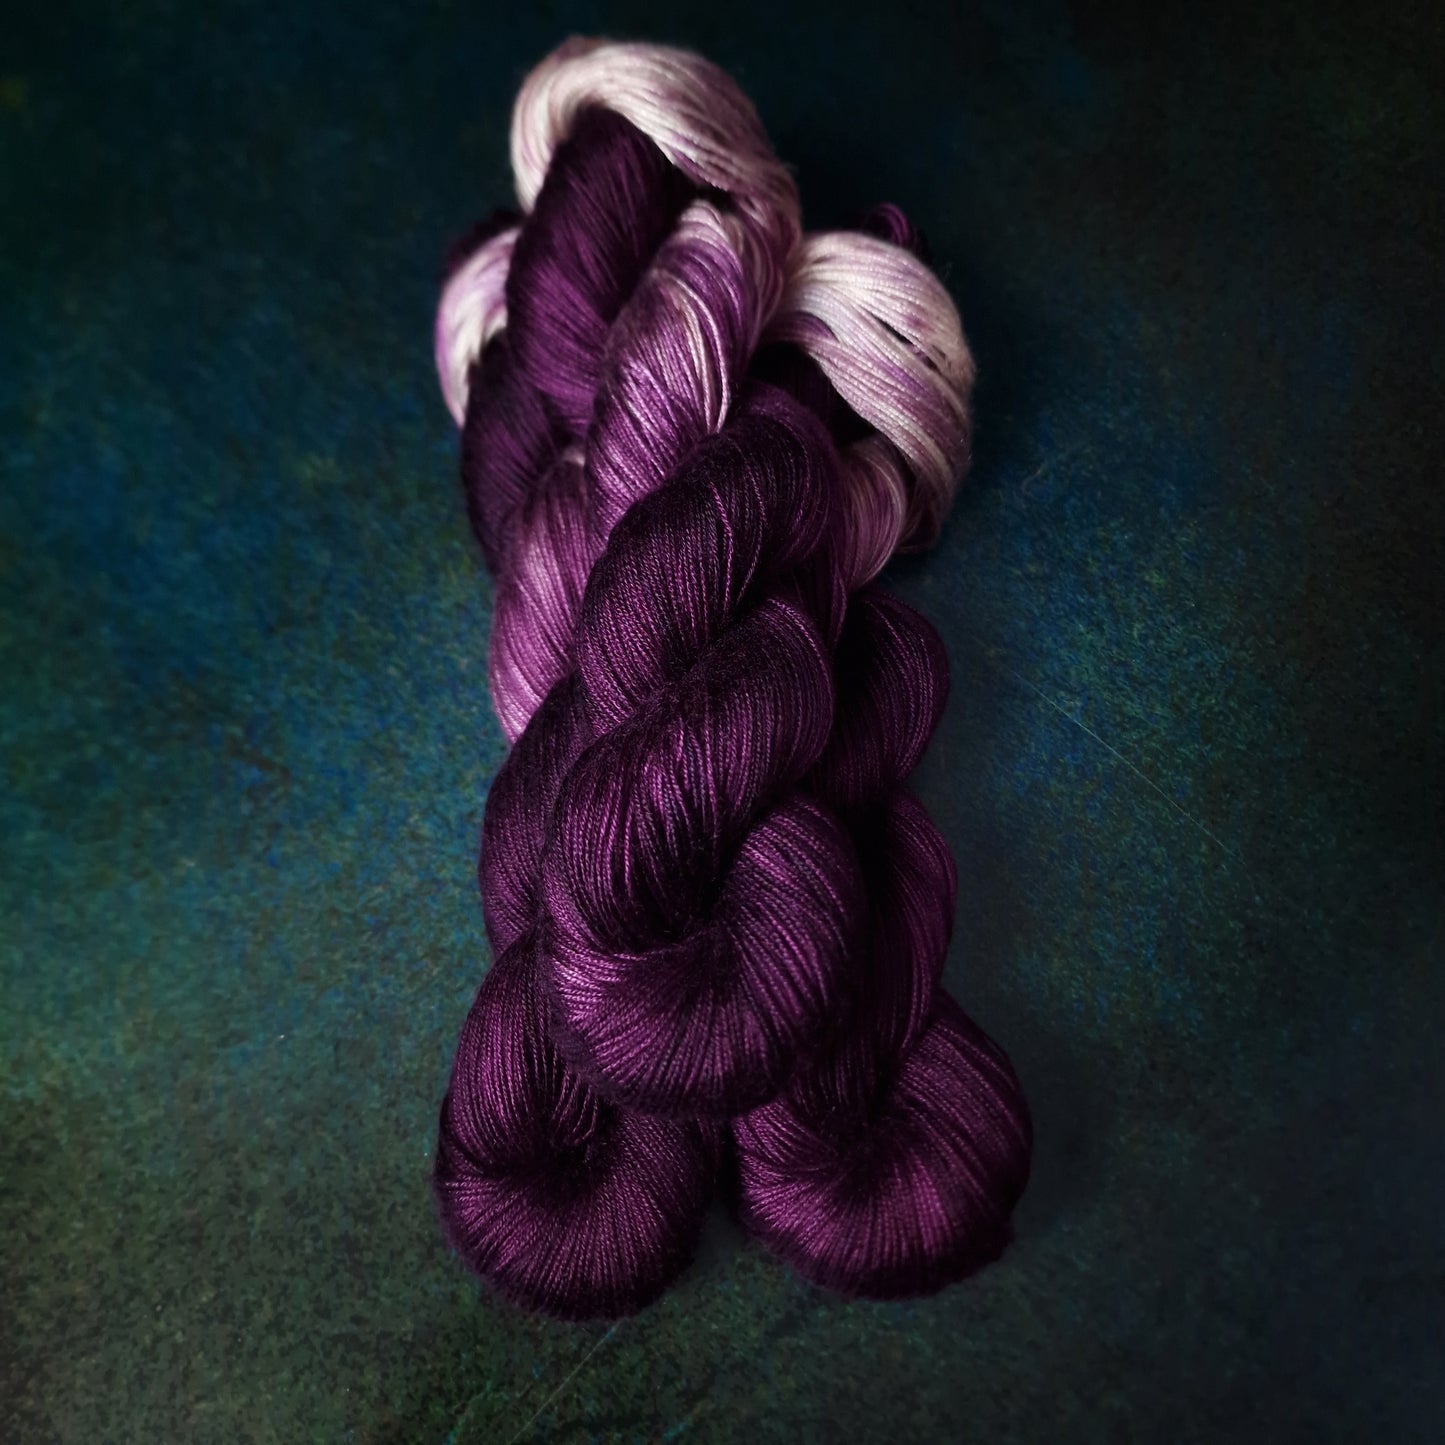 Hand dyed yarn ~ Berry Love Affair*** Dyed to order ~ fingering / DK weight tencel OR bamboo yarn, vegan, hand painted